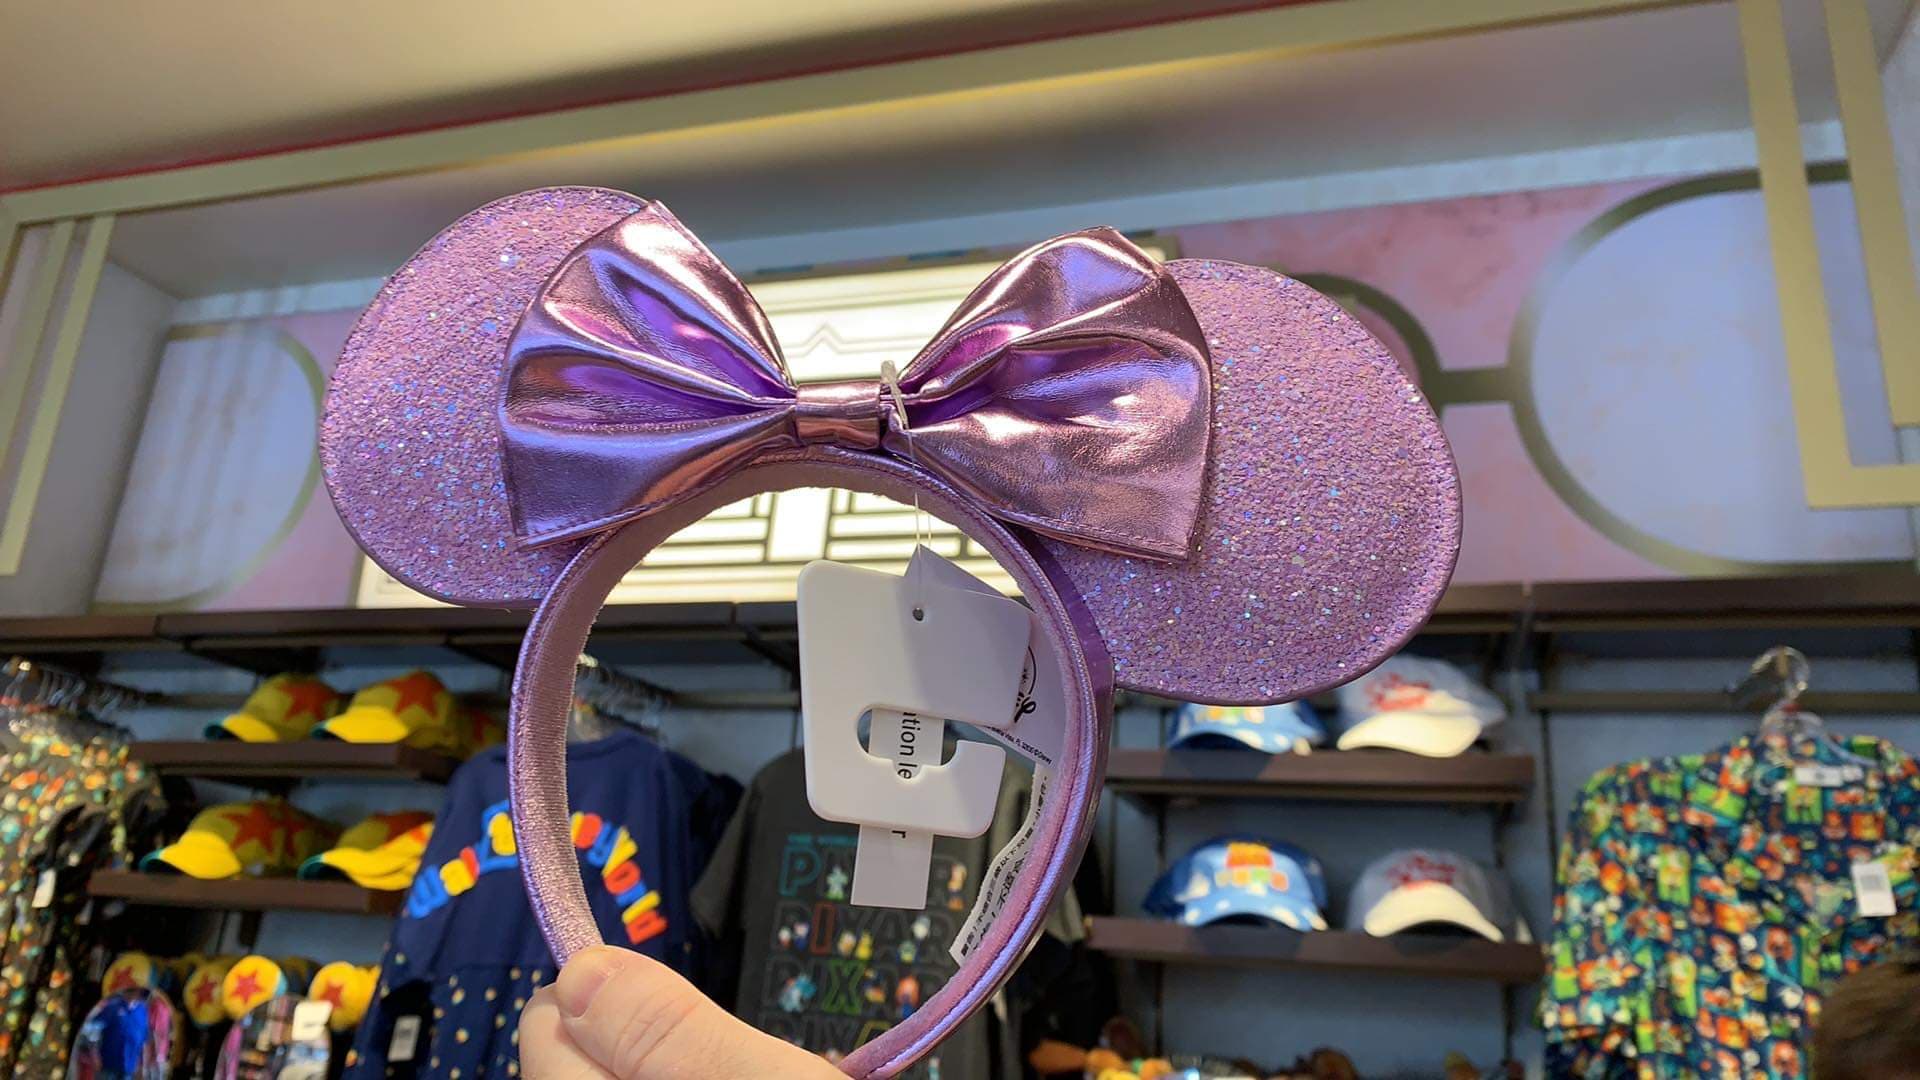 New Lavender Minnie Ears Have Serious Galactic Purple Wall Vibes